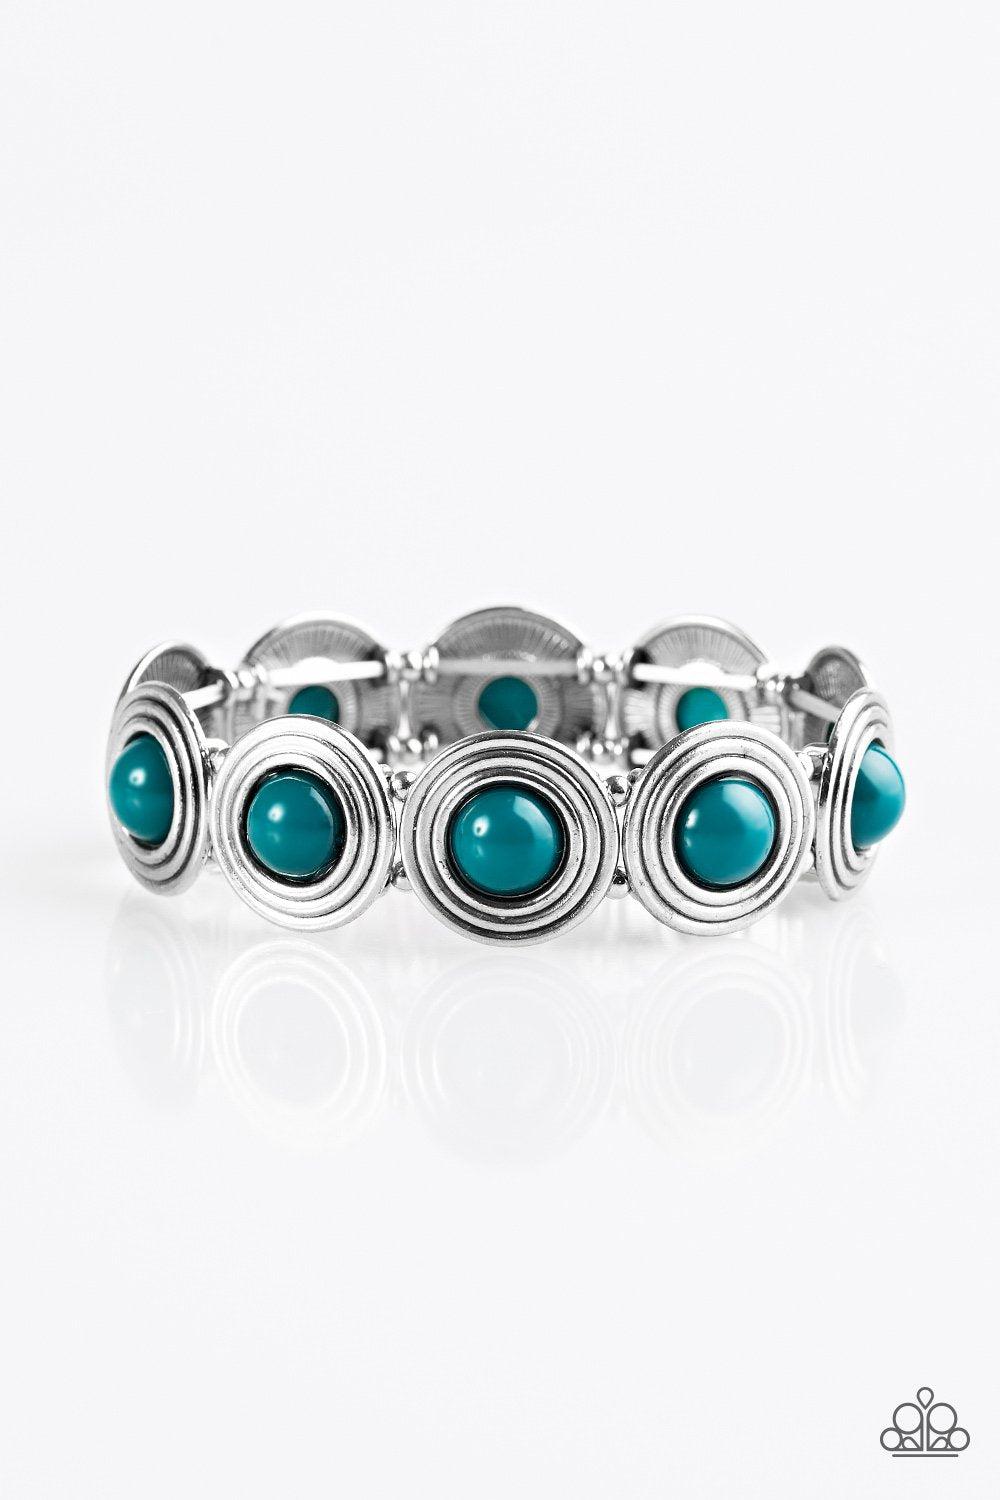 Adventurously Amazon Blue and Silver Bracelet - Paparazzi Accessories-CarasShop.com - $5 Jewelry by Cara Jewels